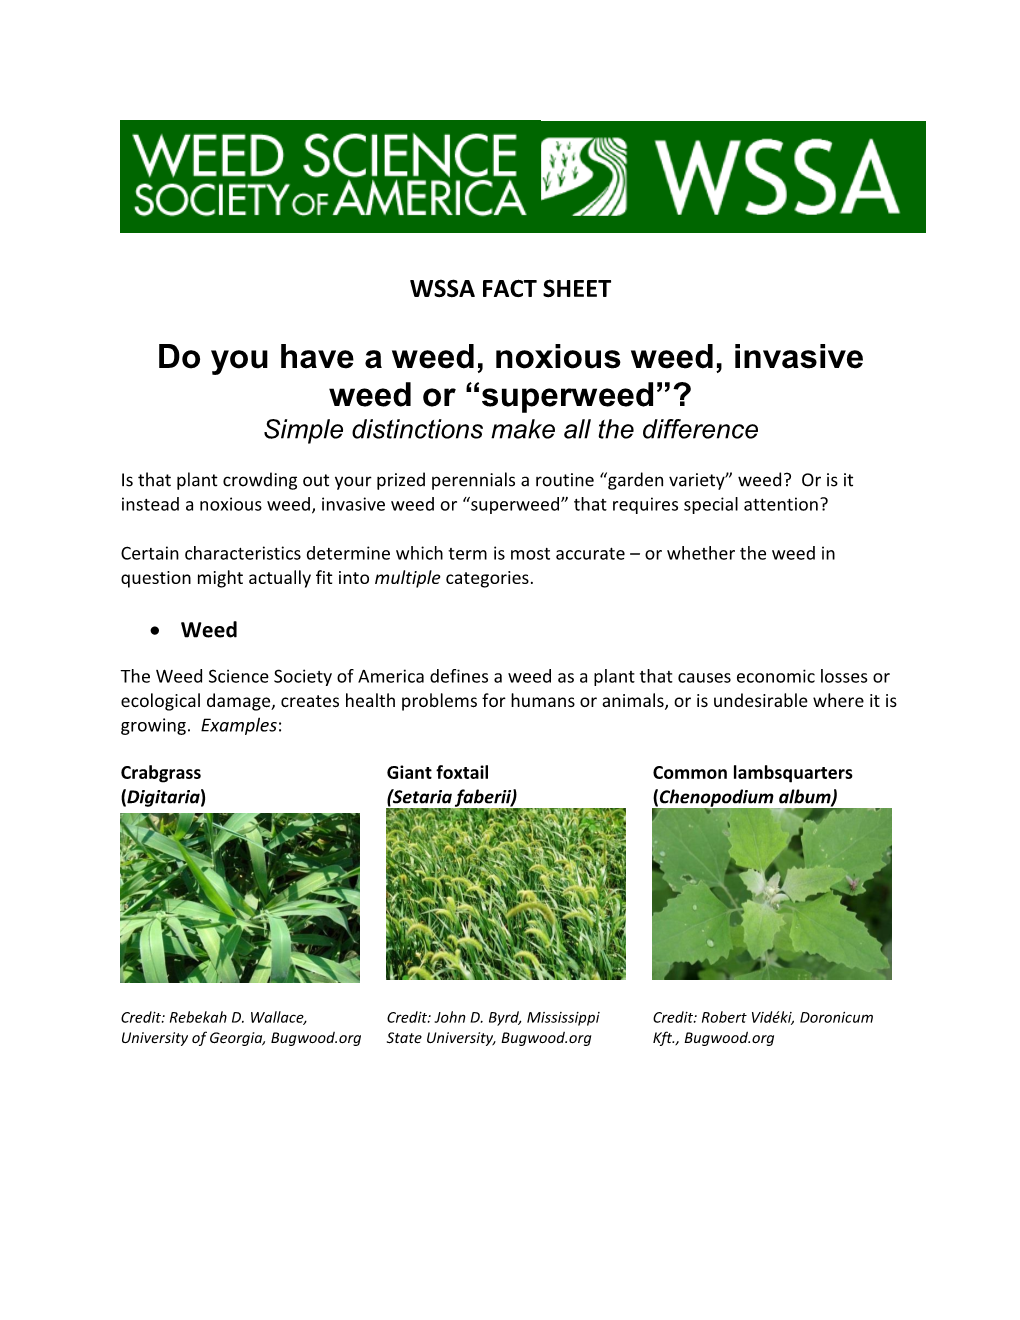 Do You Have a Weed, Noxious Weed, Invasive Weed Or “Superweed”? Simple Distinctions Make All the Difference